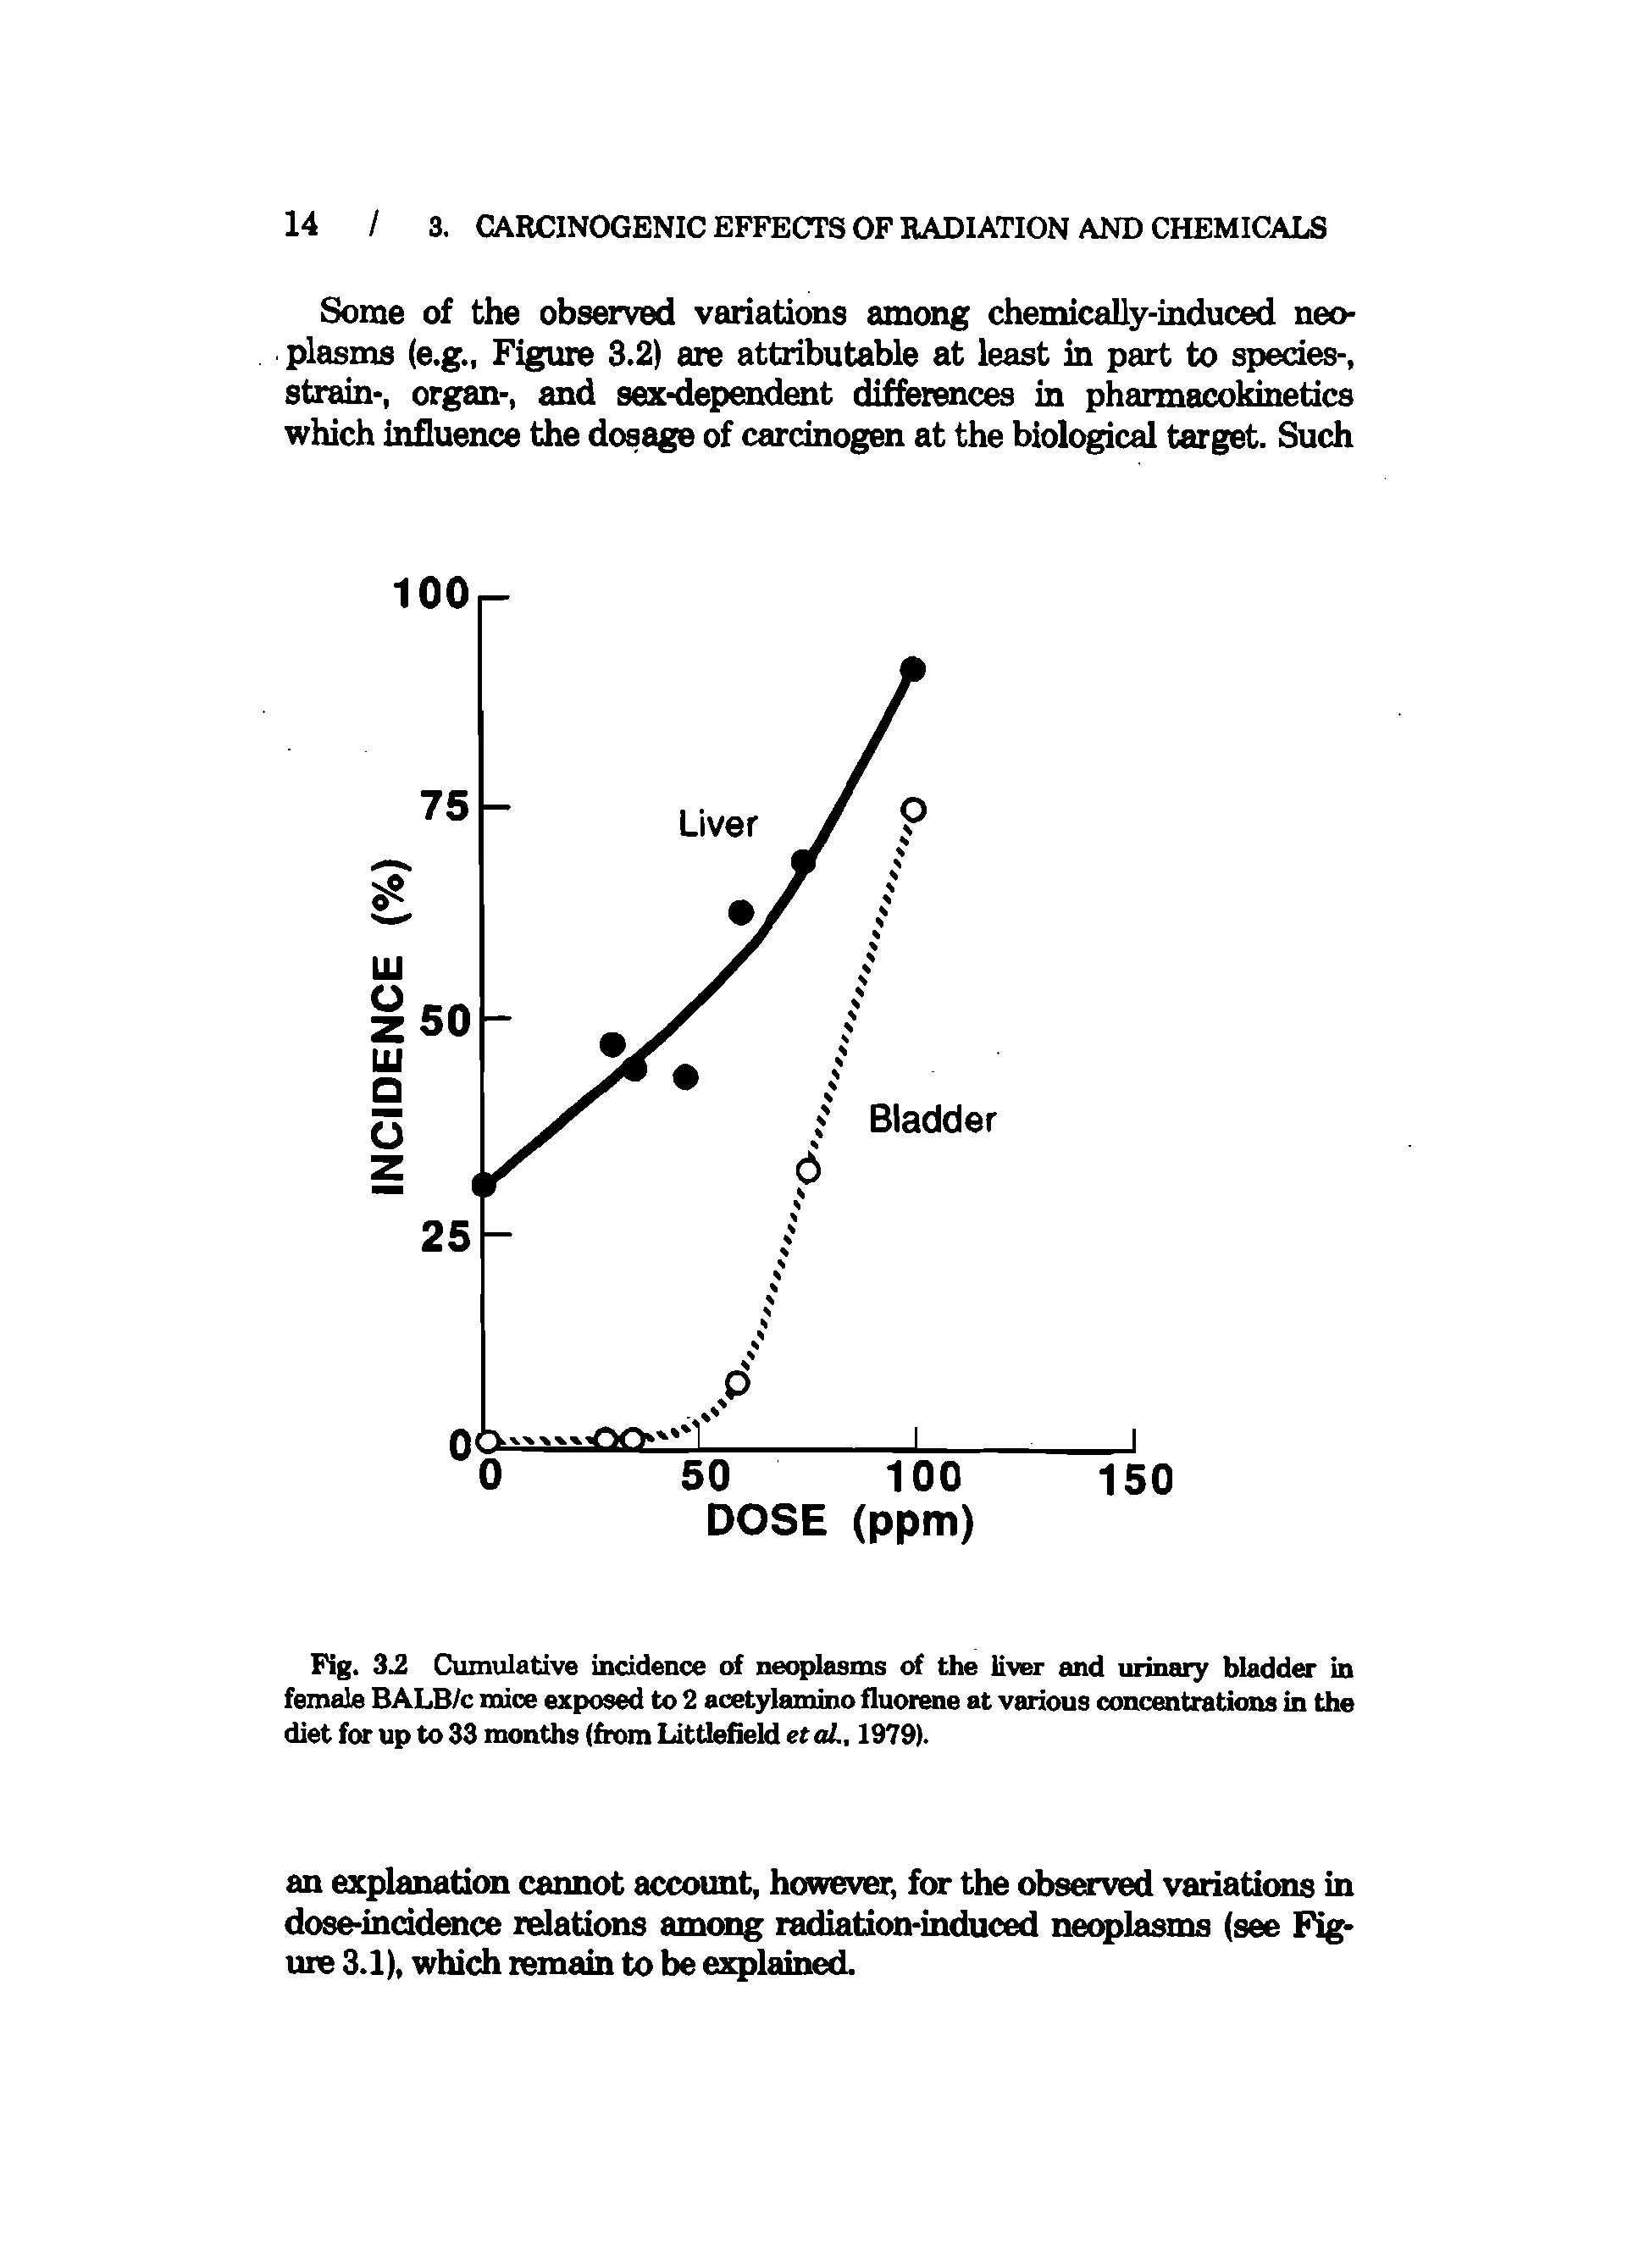 Fig. 3.2 Cumulative incidence of neoplasms of the liver and urinary bladder in female BALB/c mice exposed to 2 aoetylamino fluorene at various concentrations in the diet for up to 33 months (from Littlefield etaL, 1979).